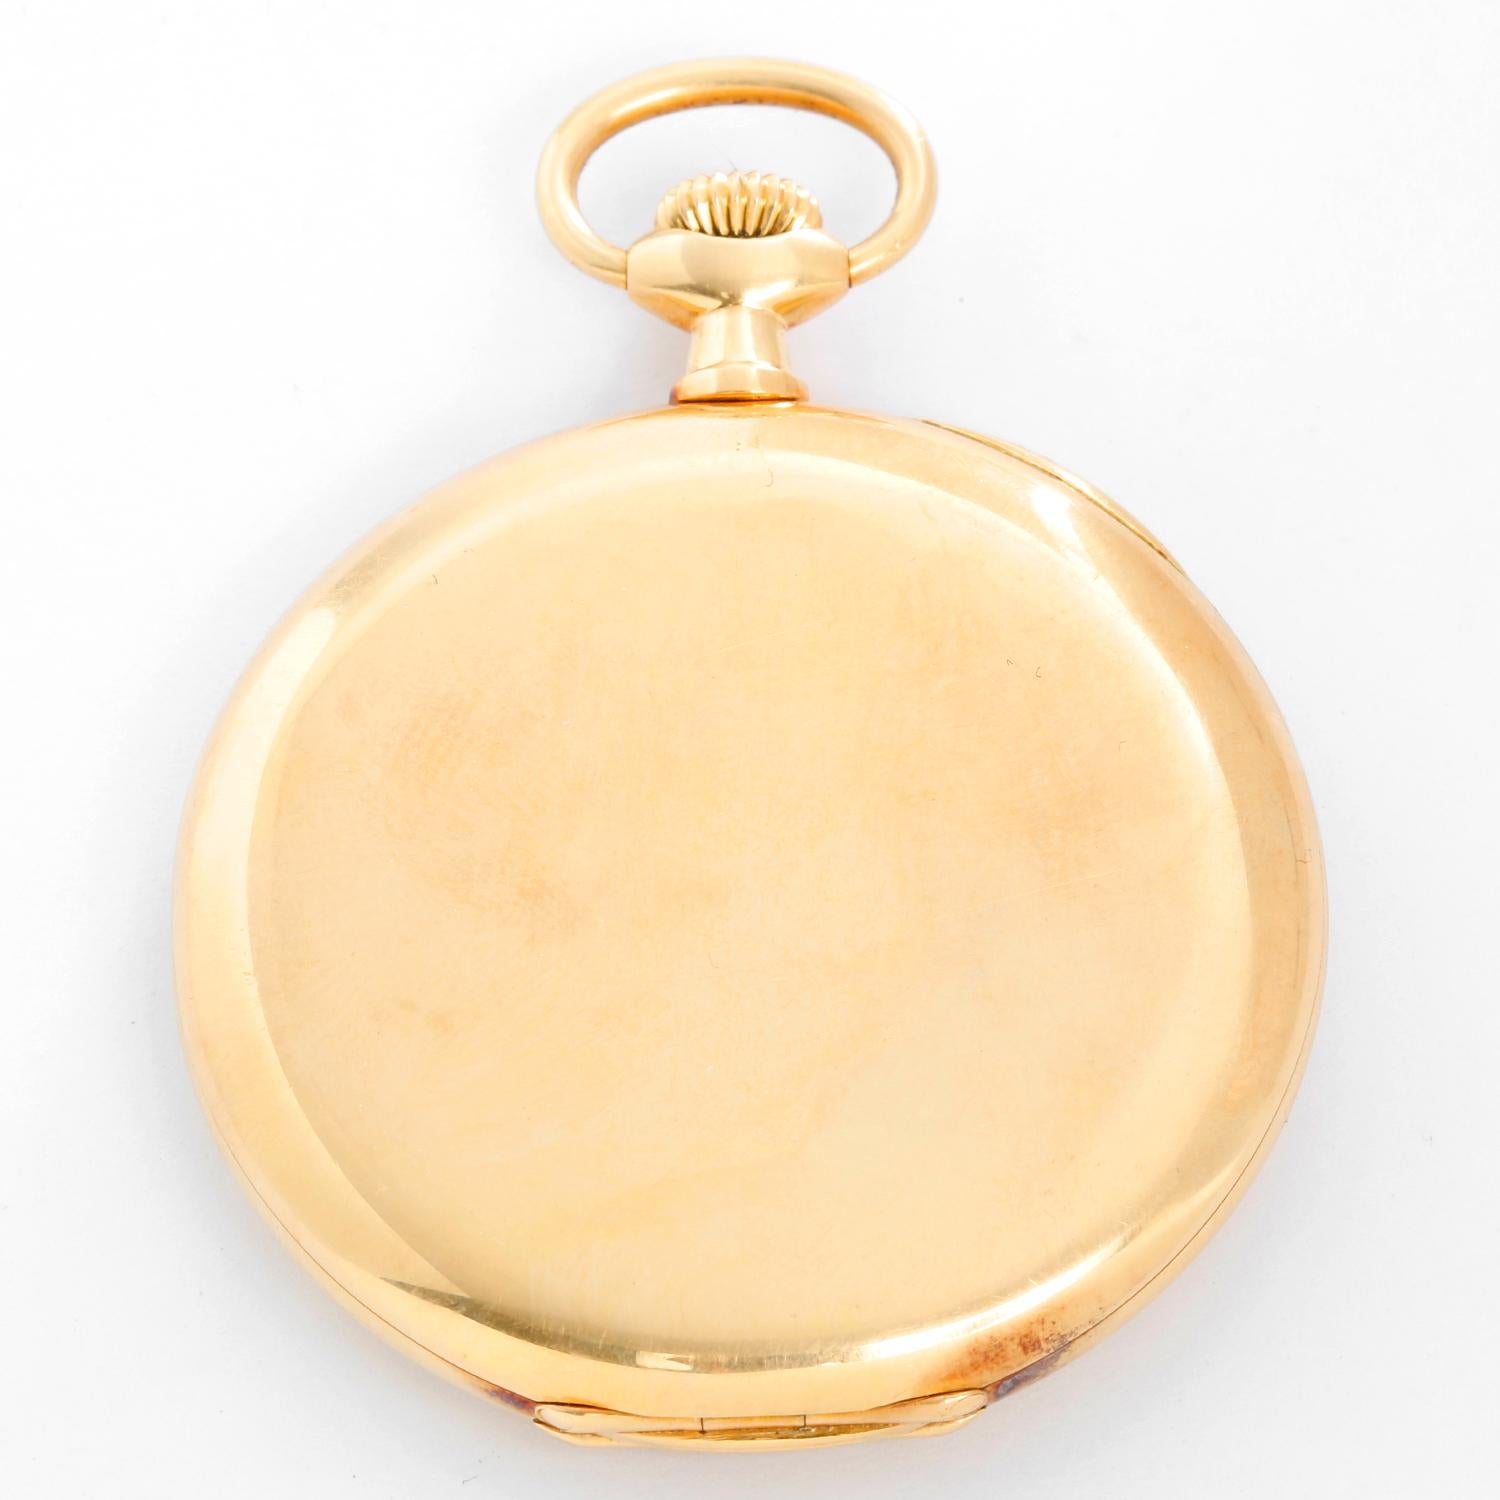 Patek Philippe 18K Yellow  Gold Pocket Watch - Manual winding. 18K Yellow gold case ( 45 mm ). Champagne guilloche dial with accentuated Arabic numerals; subdial at 6 o'clock. Pre-owned with custom box. Circa 1940's.